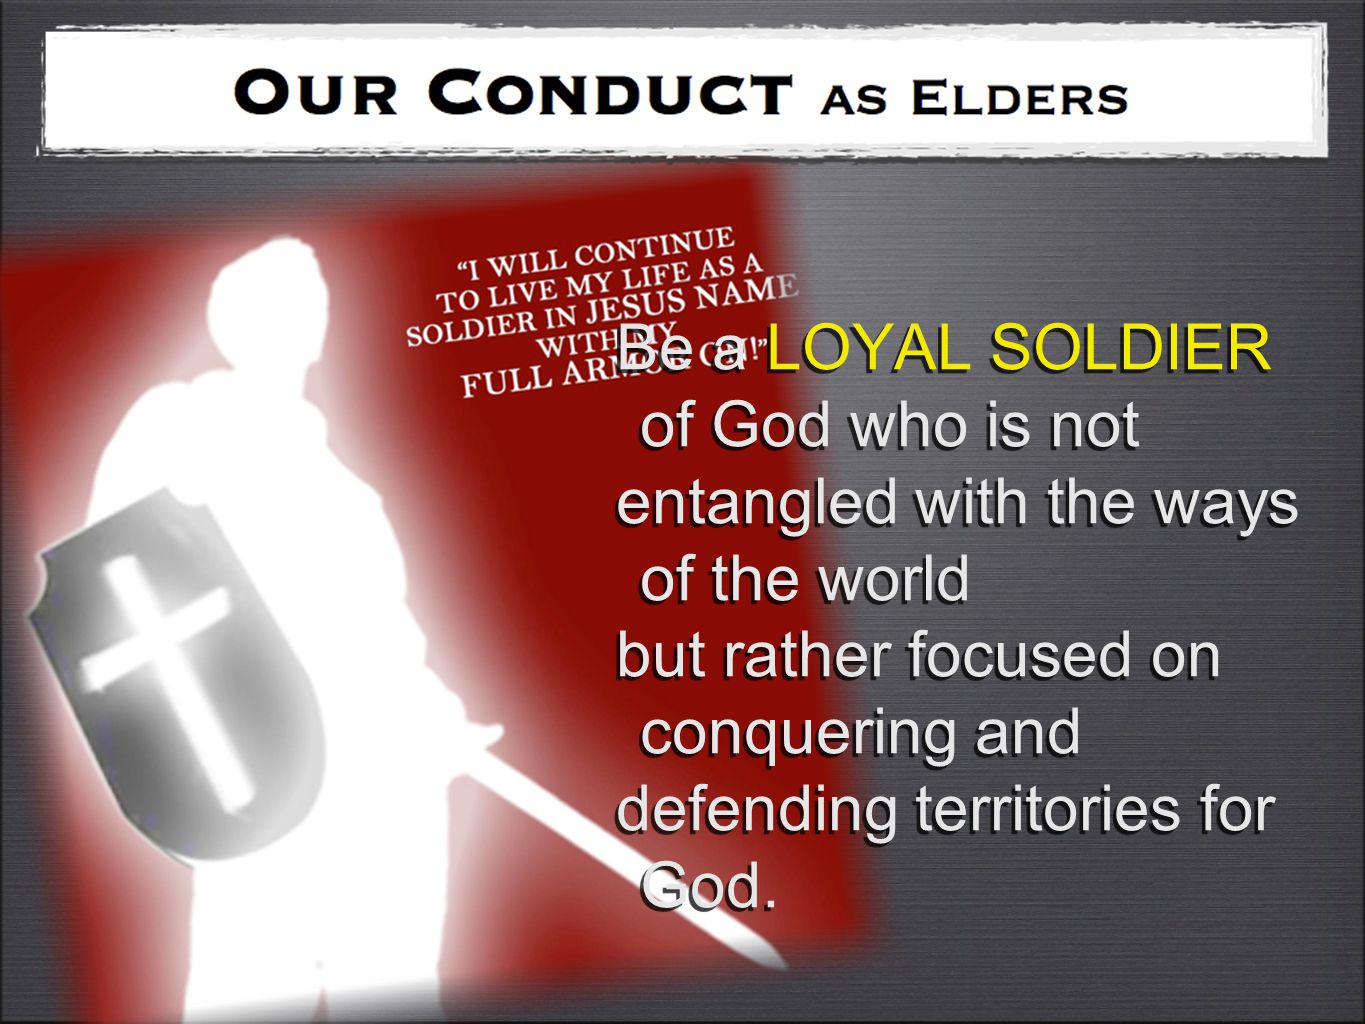 Be a LOYAL SOLDIER of God who is not entangled with the ways of the world but rather focused on conquering and defending territories for God.